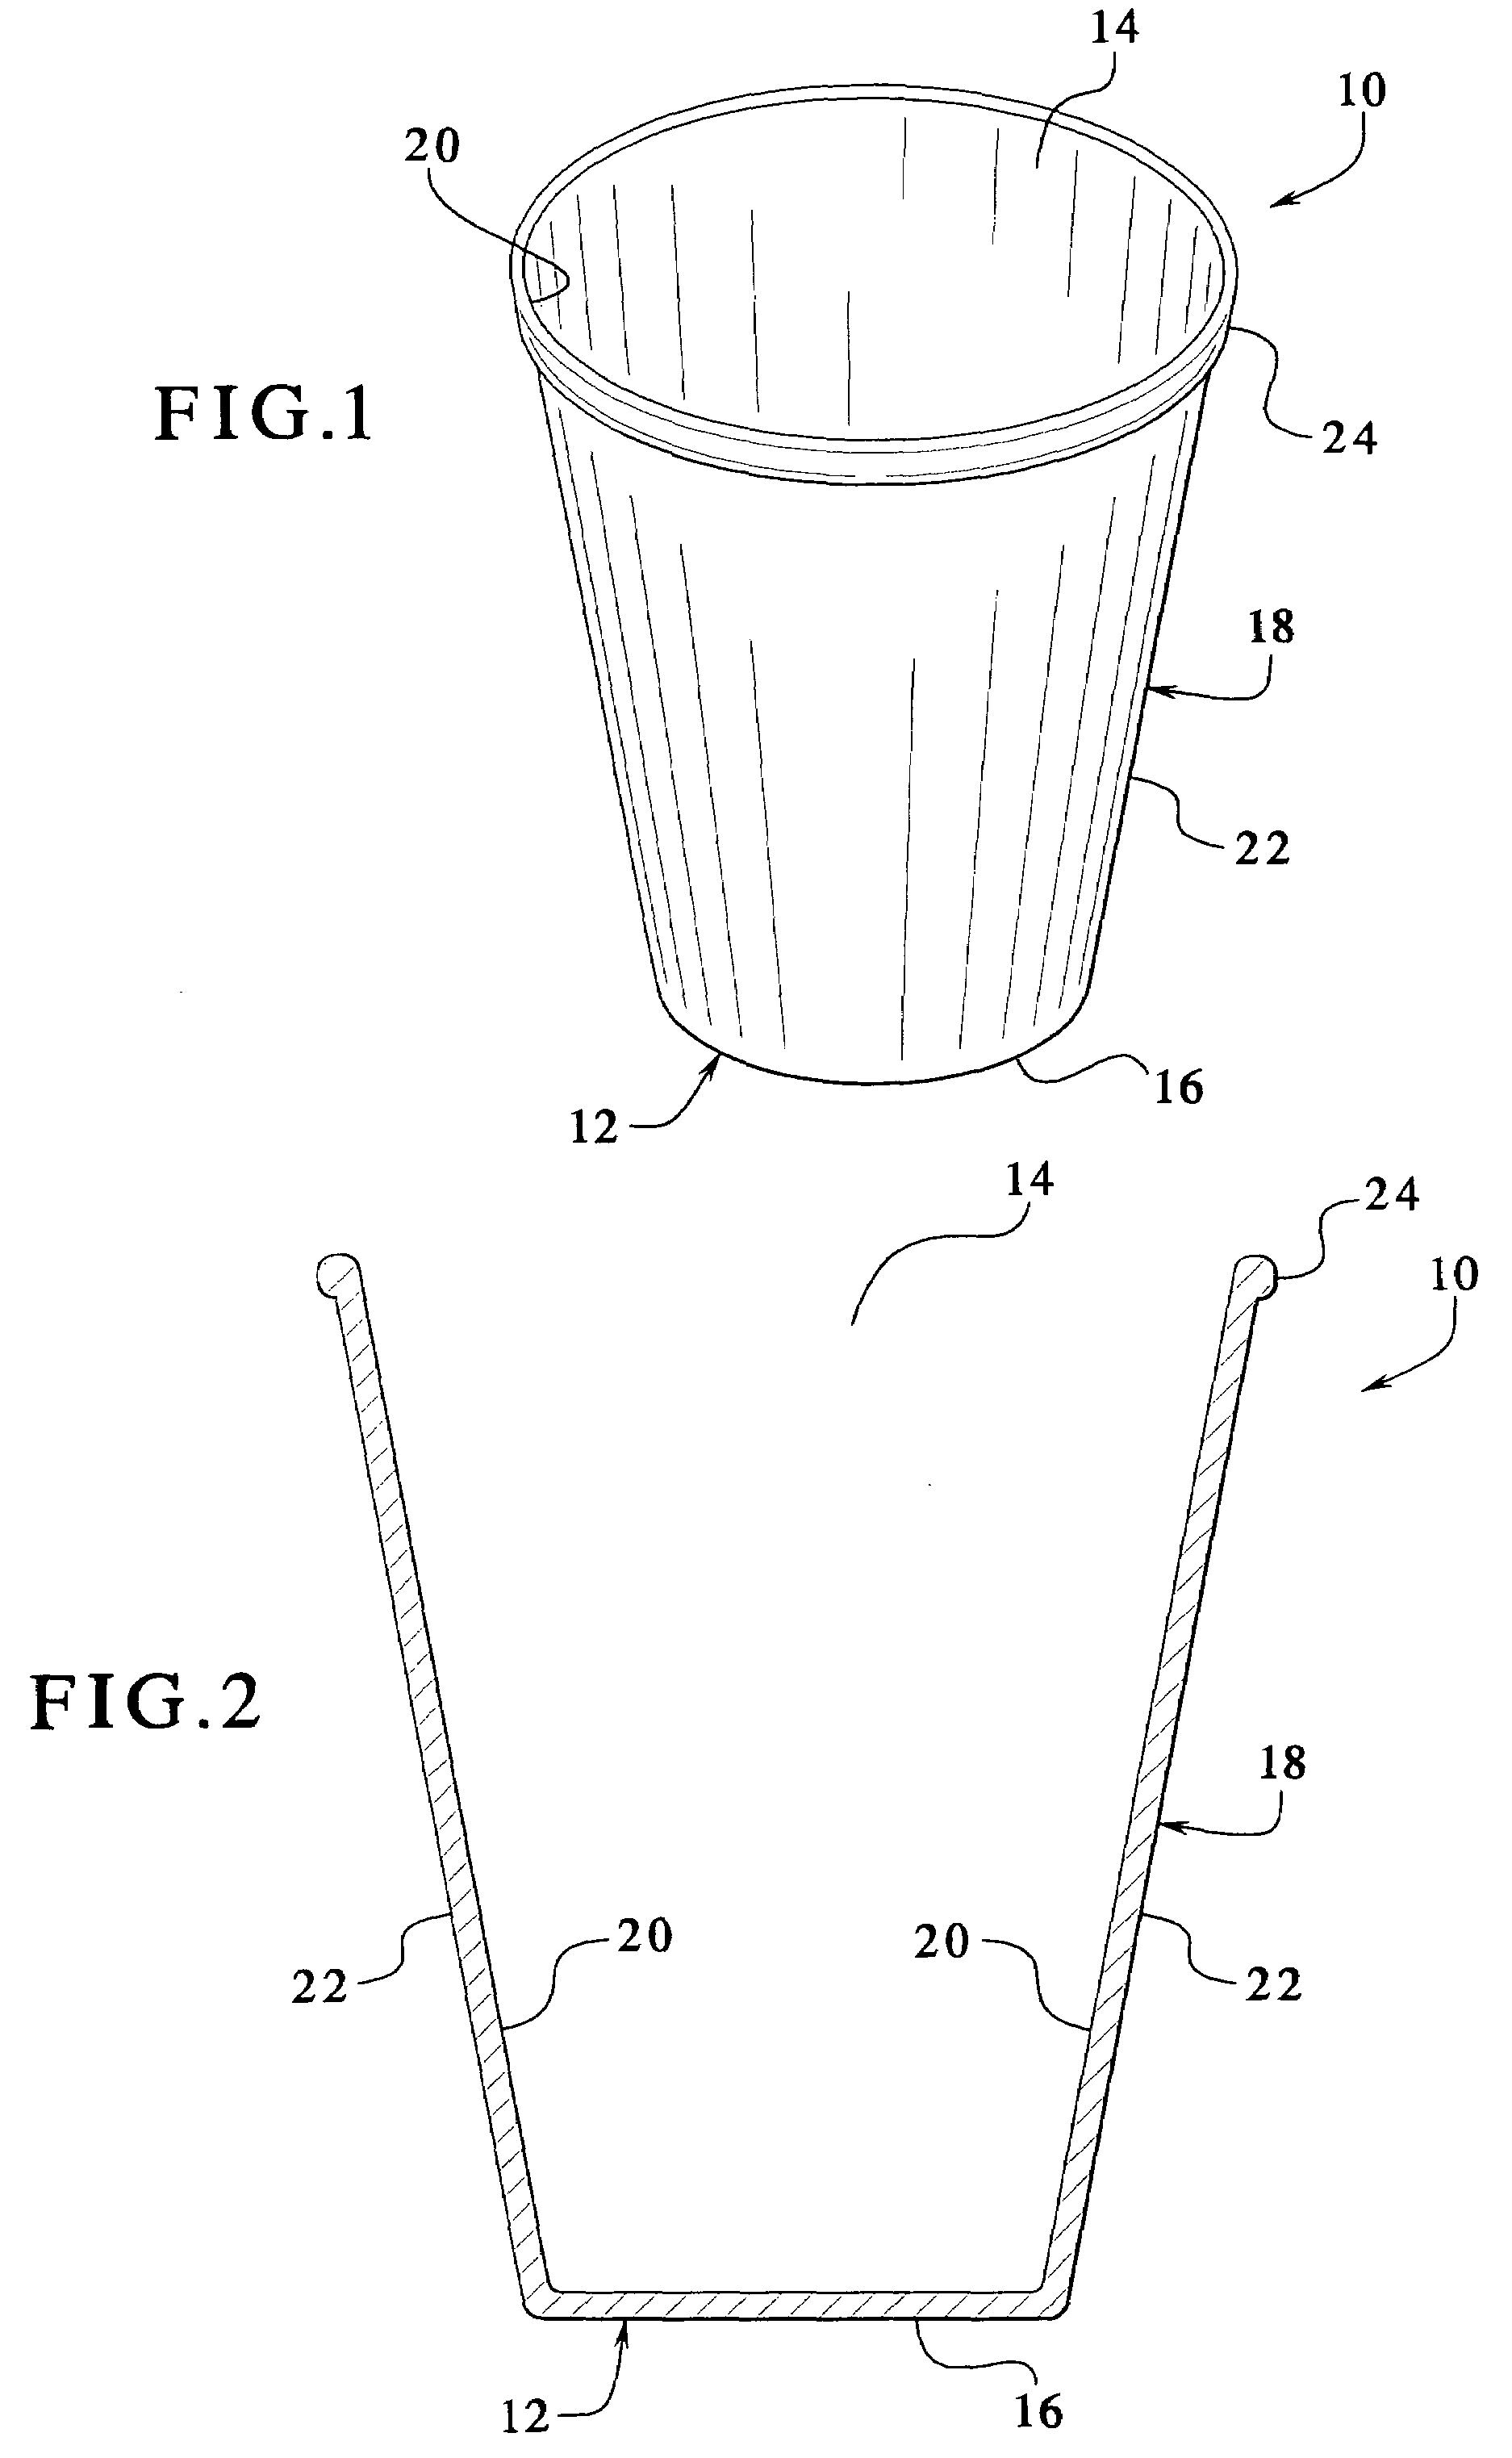 Method of manufacturing a reinforced plastic foam cup